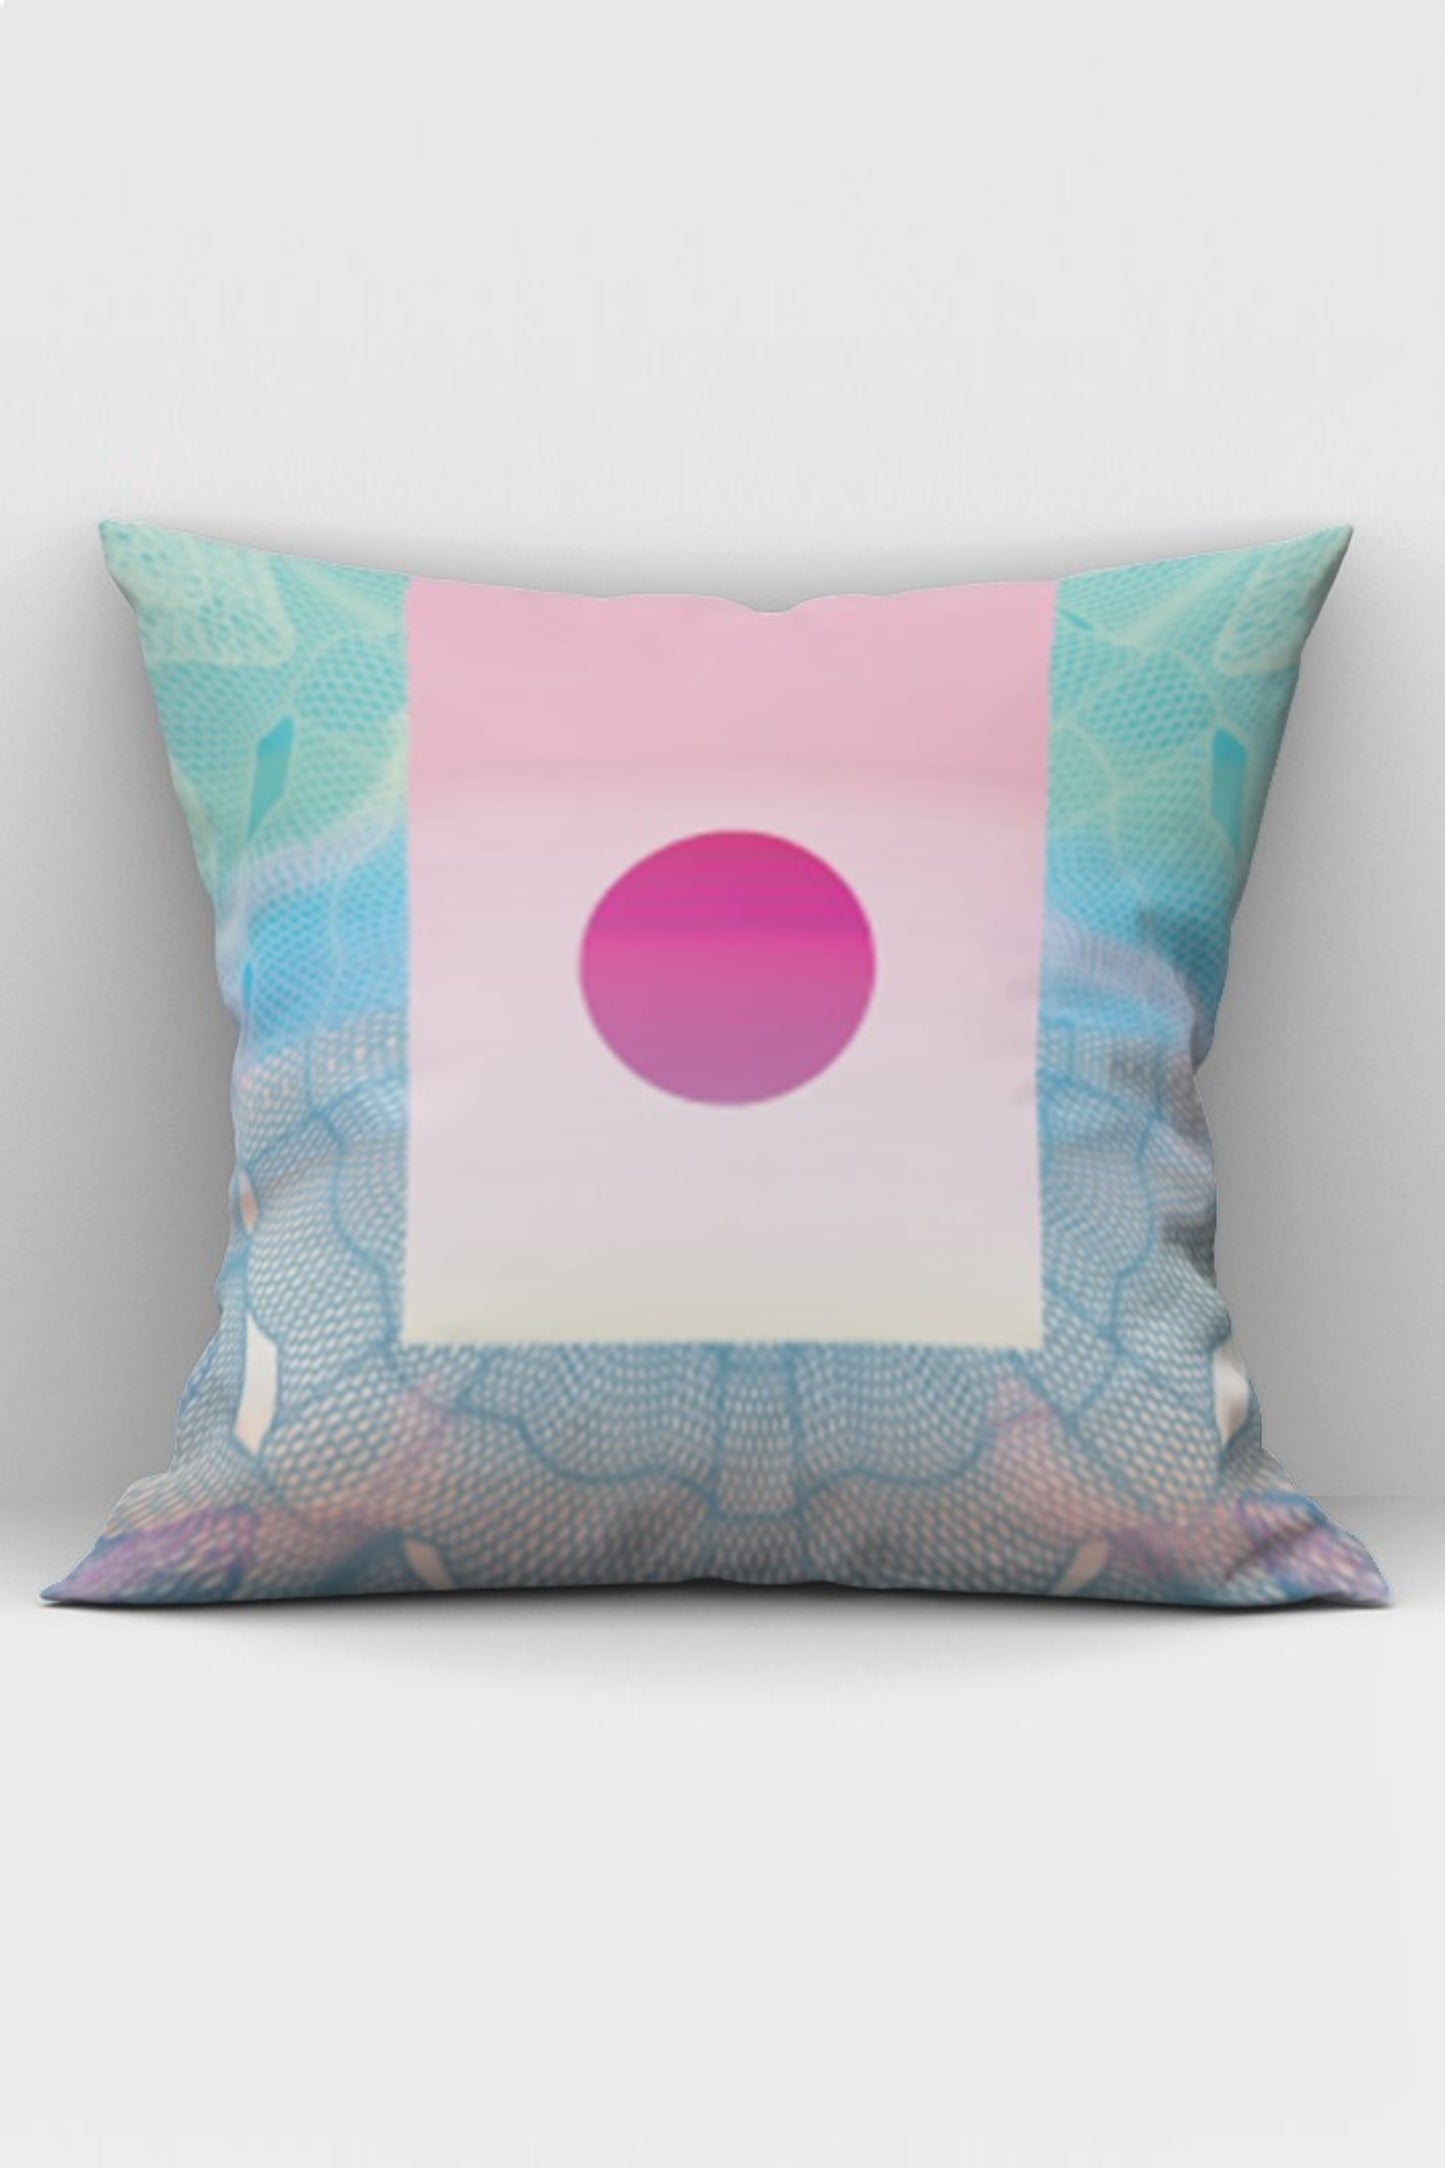 Bless My Funk Pillow - Magenta, green, blue & white.